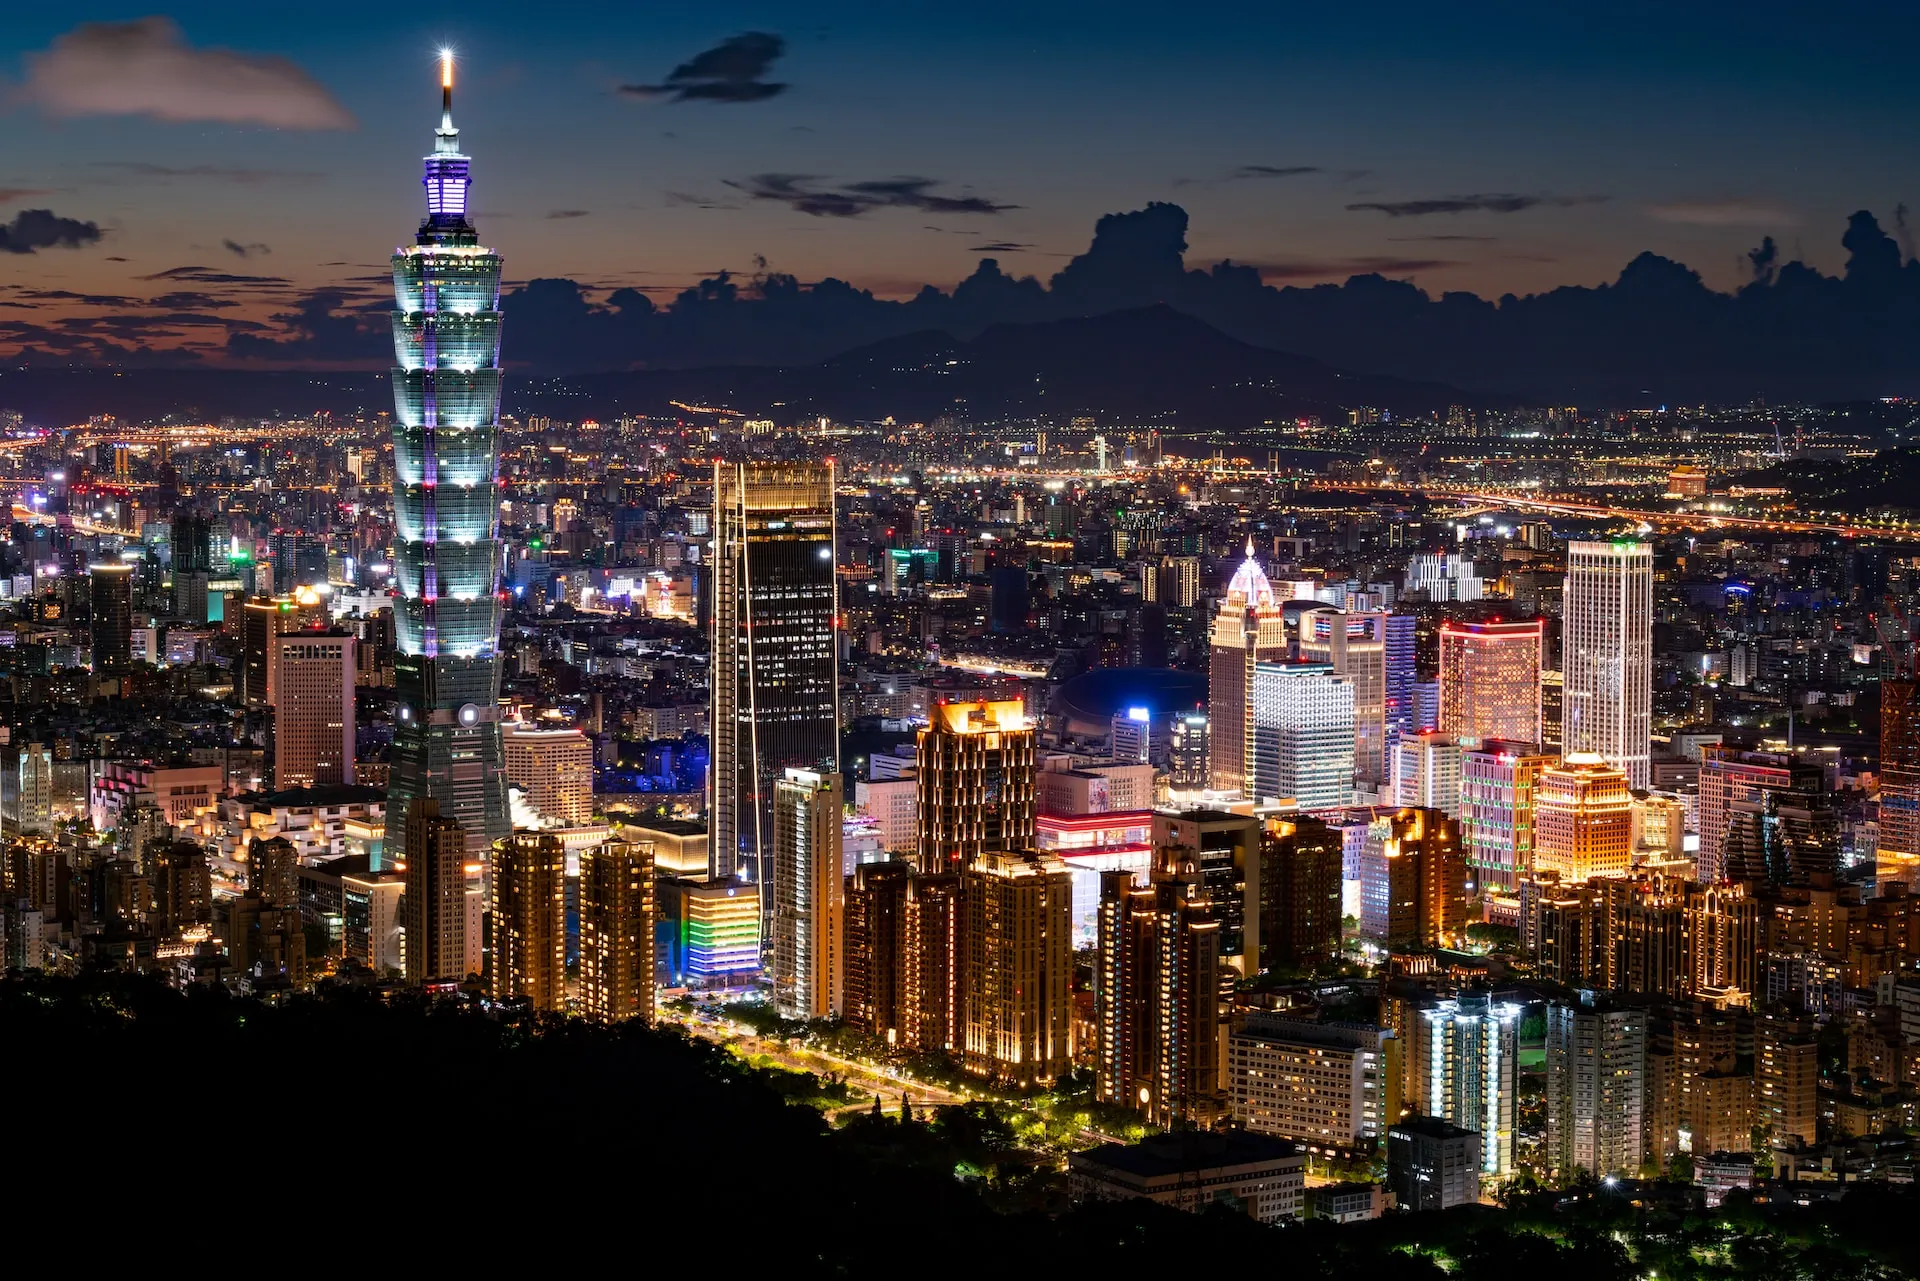 Night in Taipei, Source: Photo by Timo Volz on Unsplash